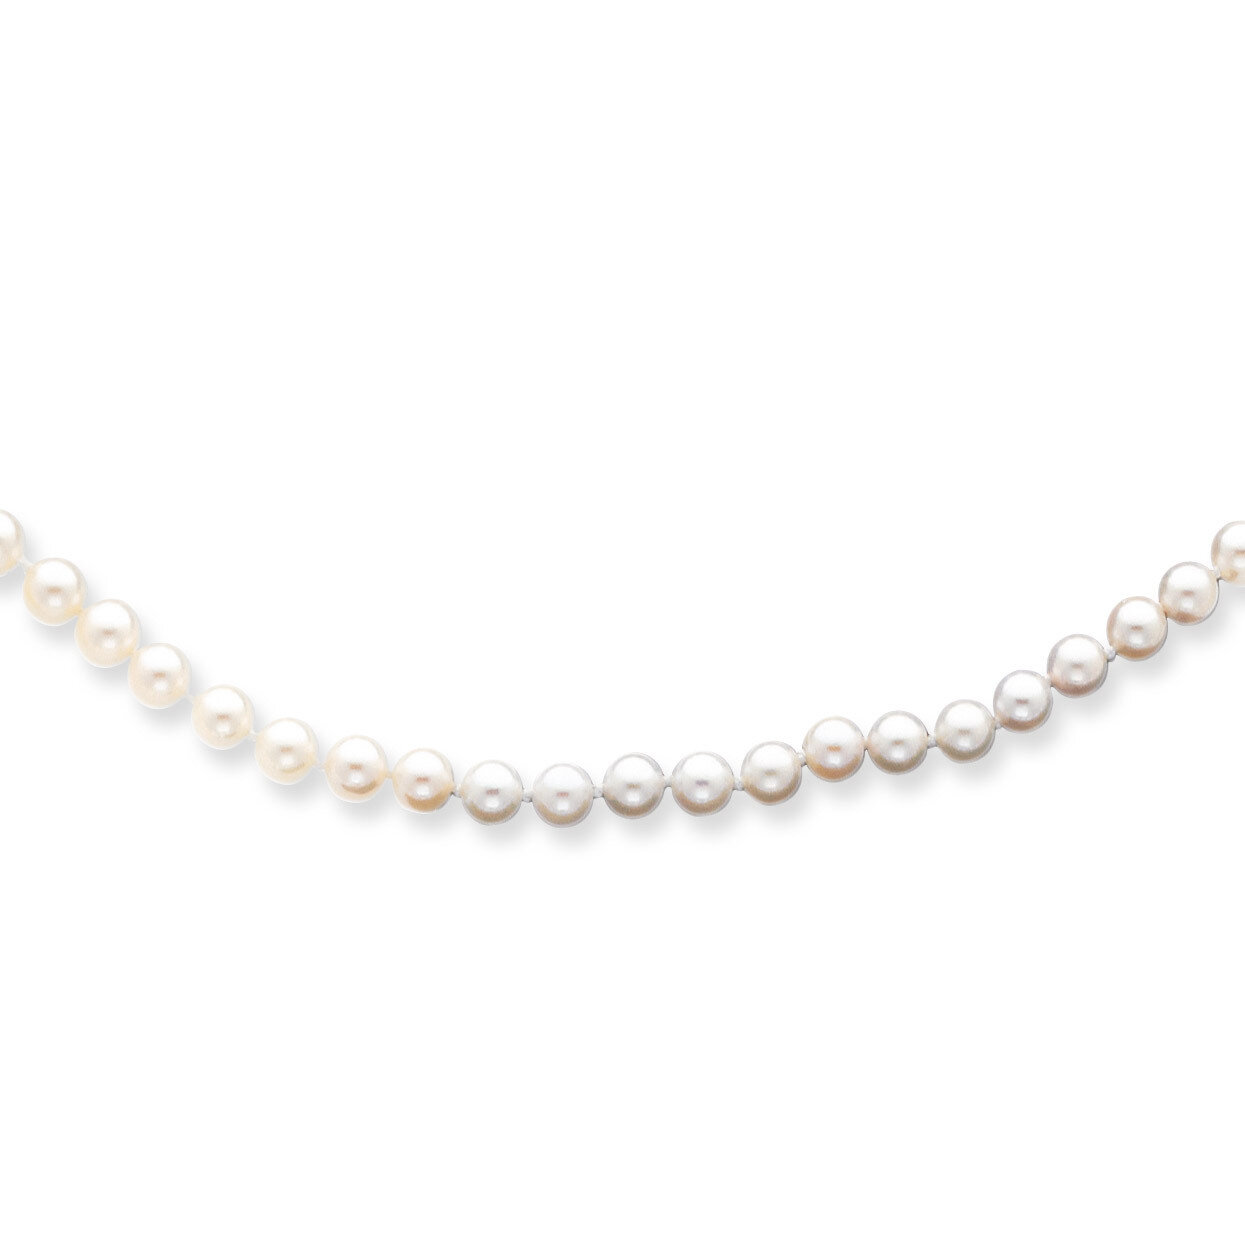 5-6mm Round White Saltwater Akoya Cultured Pearl Necklace 20 Inch 14k Gold PL50AA-20